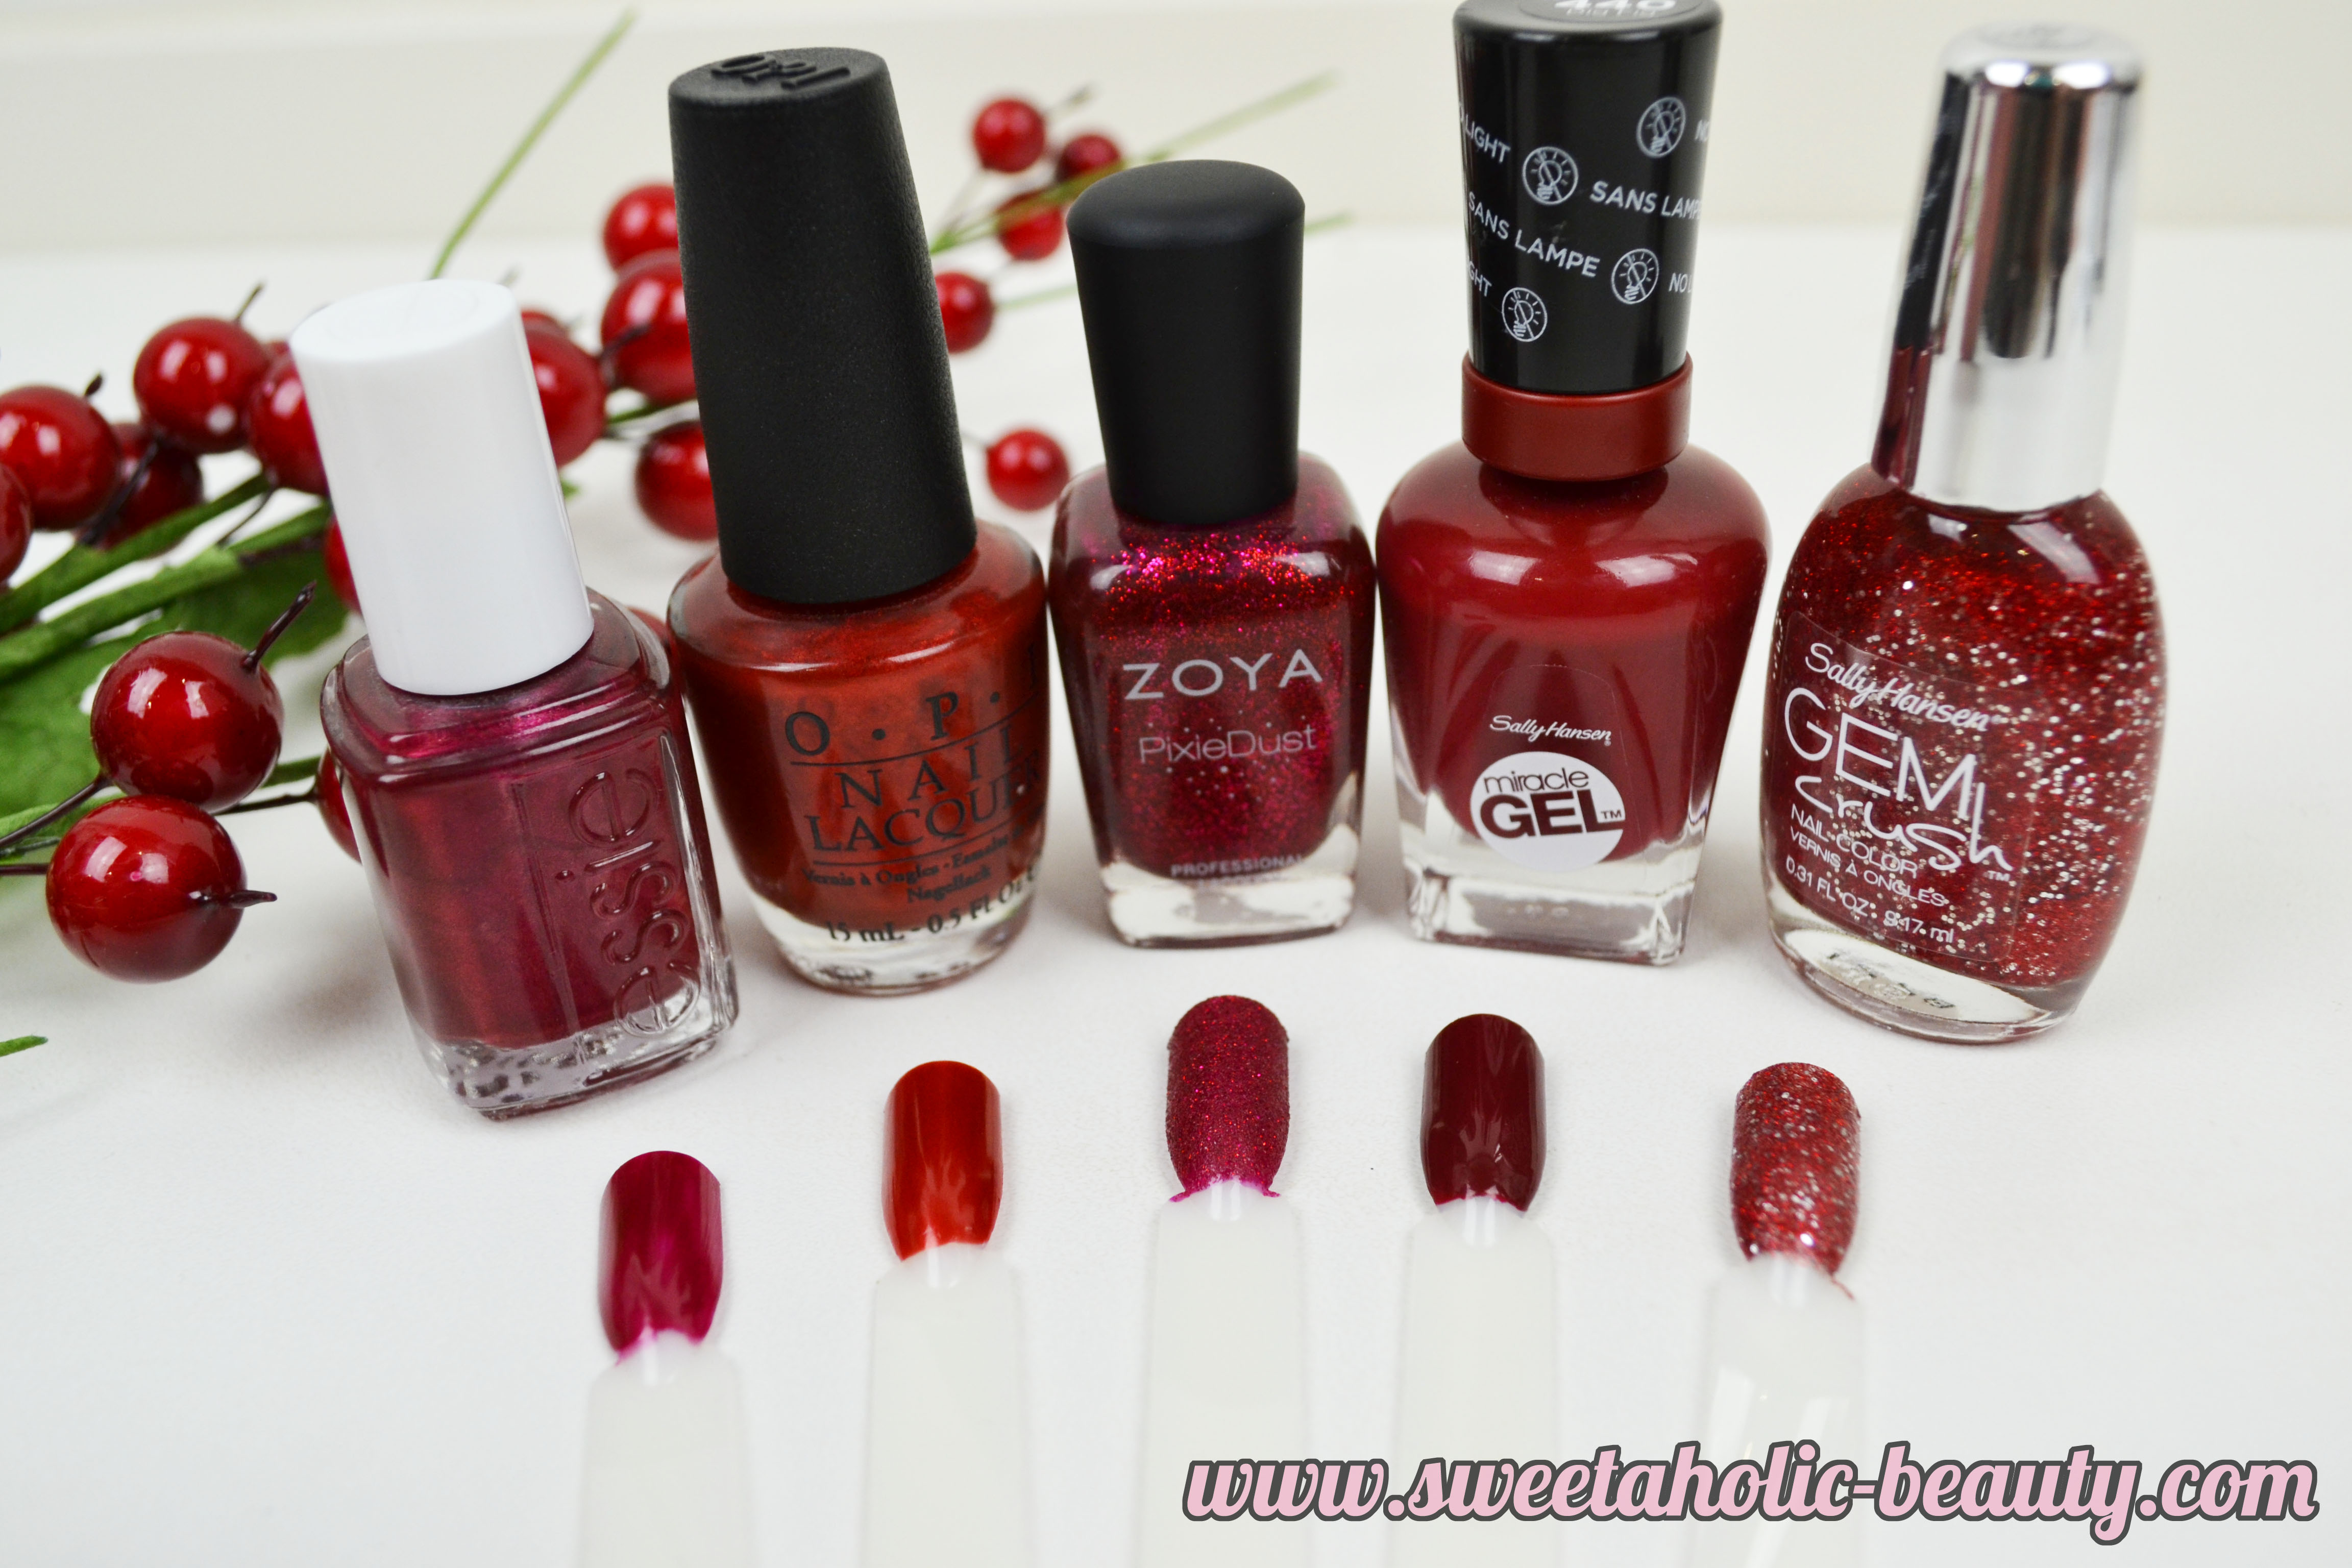 The Perfect Red: Nails - Sweetaholic Beauty